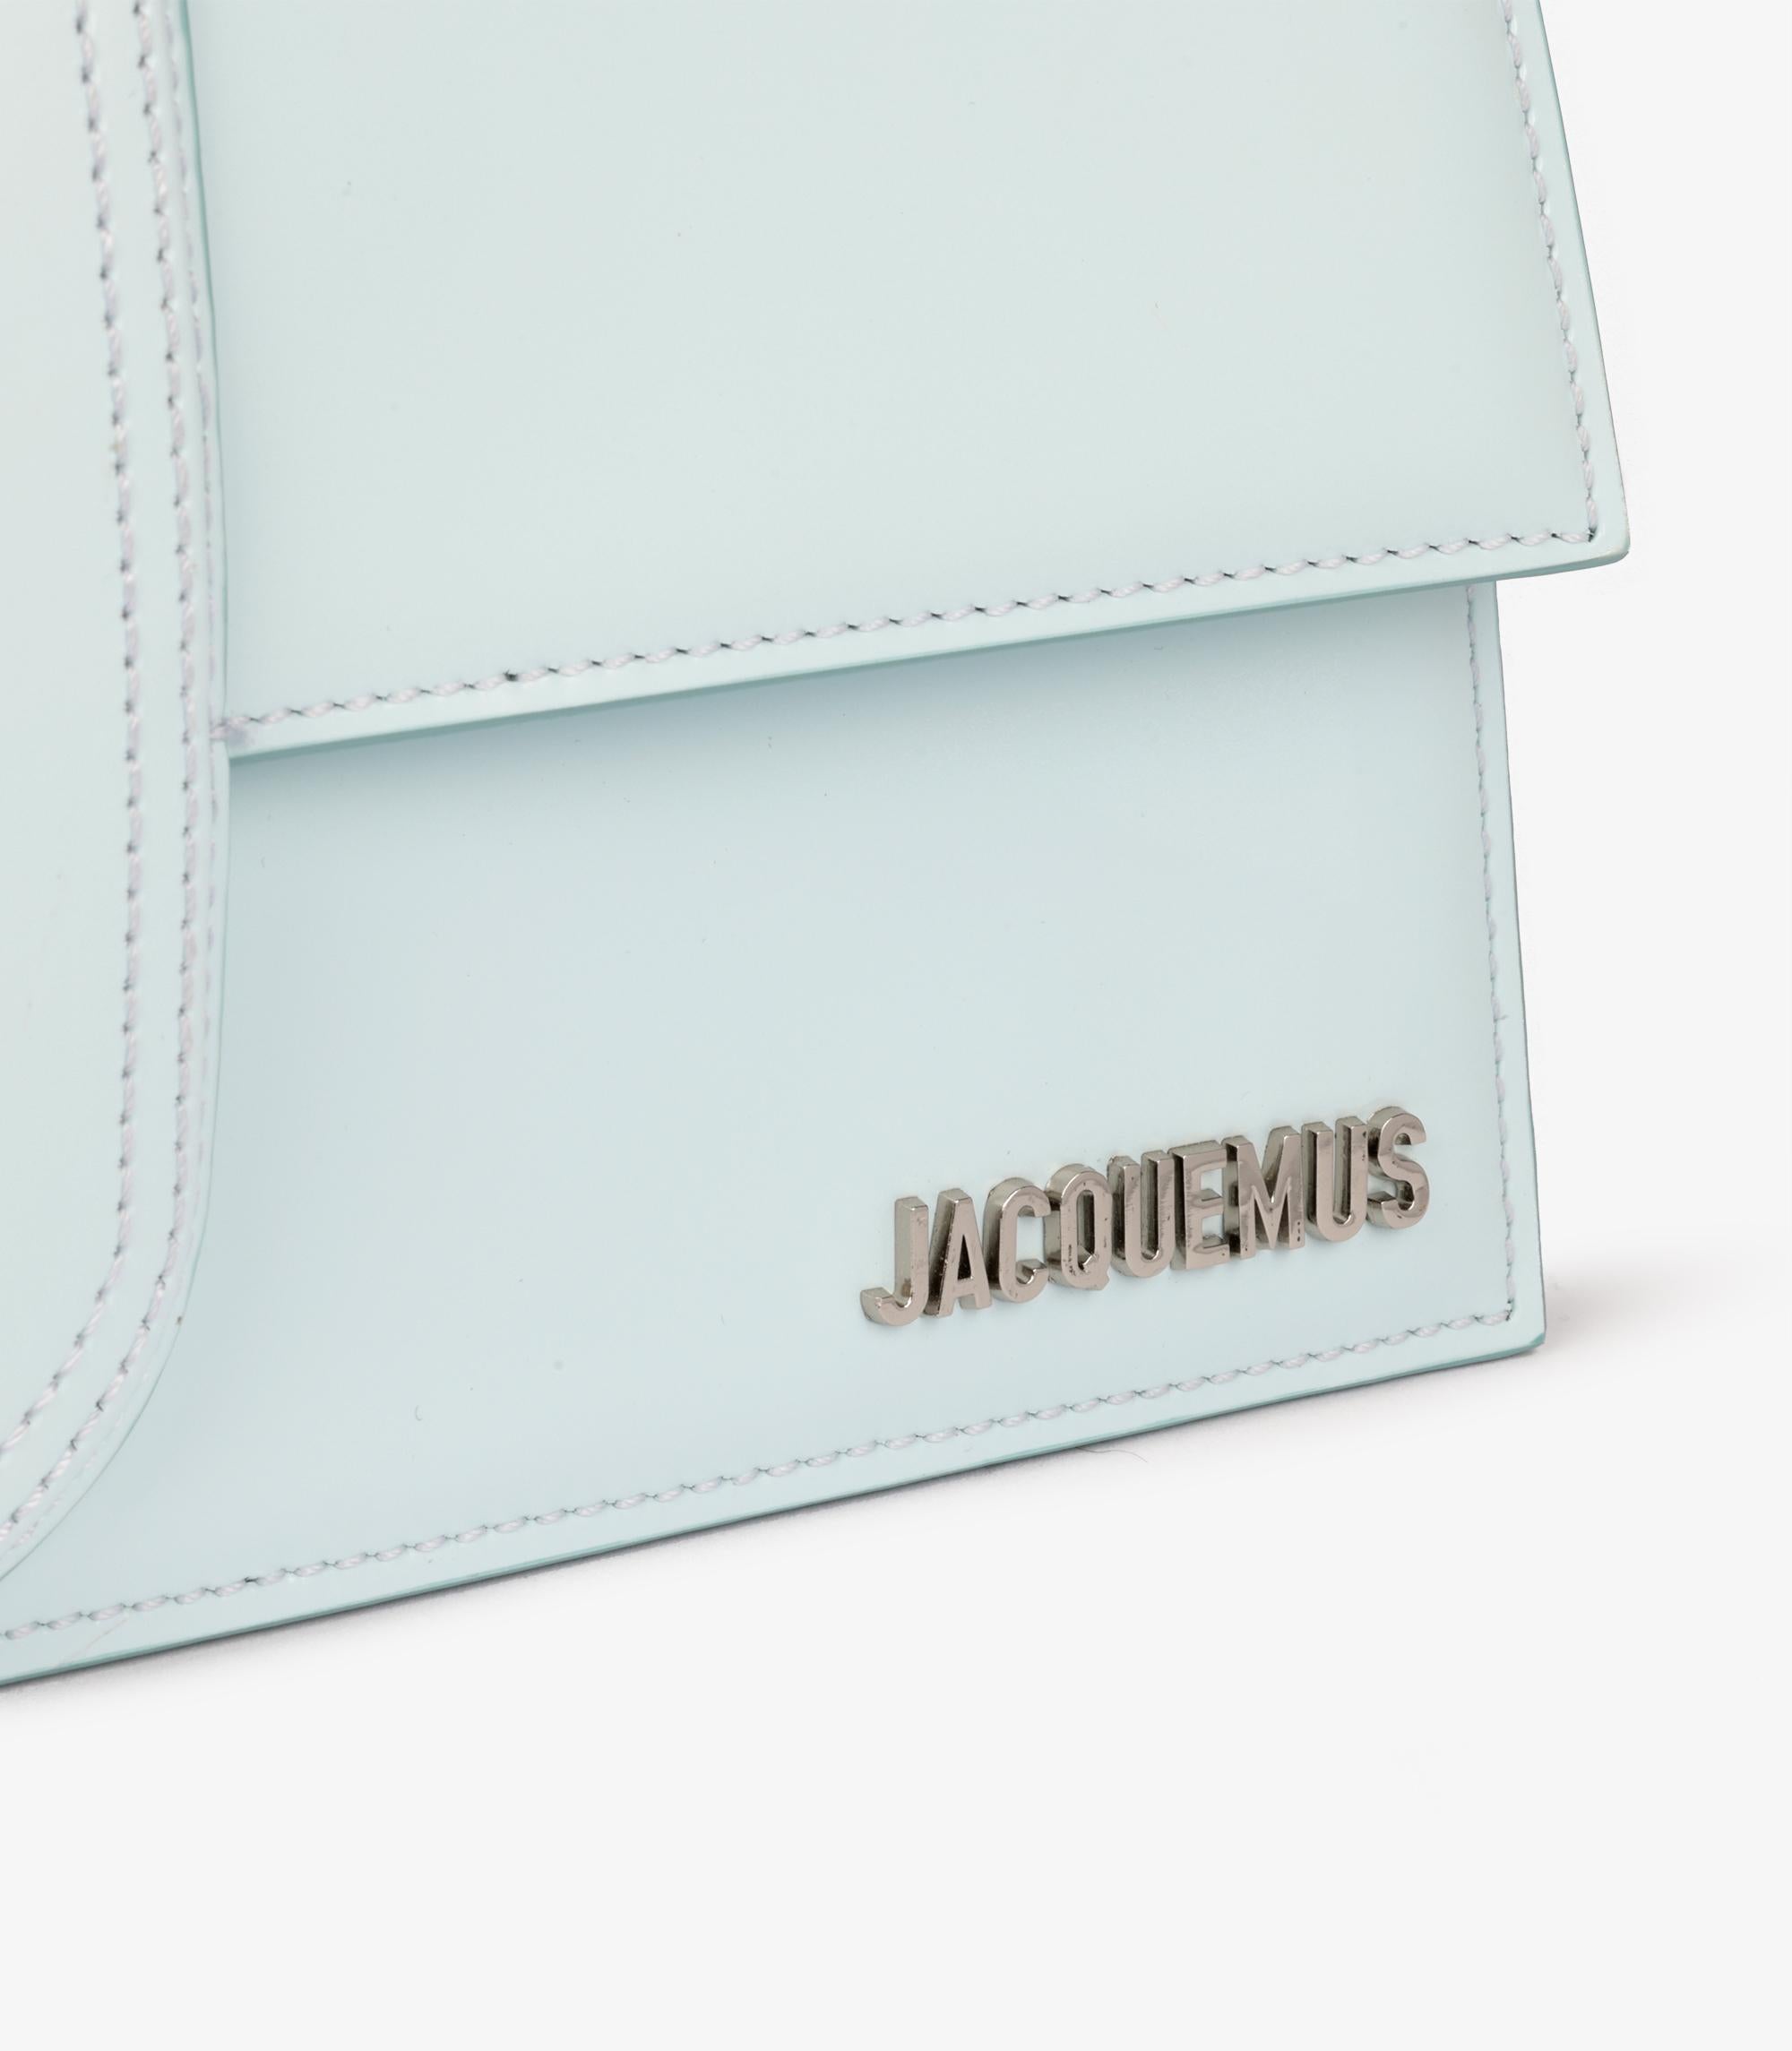 Jacquemus Light Blue Patent Leather Le Bambino Long In New Condition For Sale In Bishop's Stortford, Hertfordshire